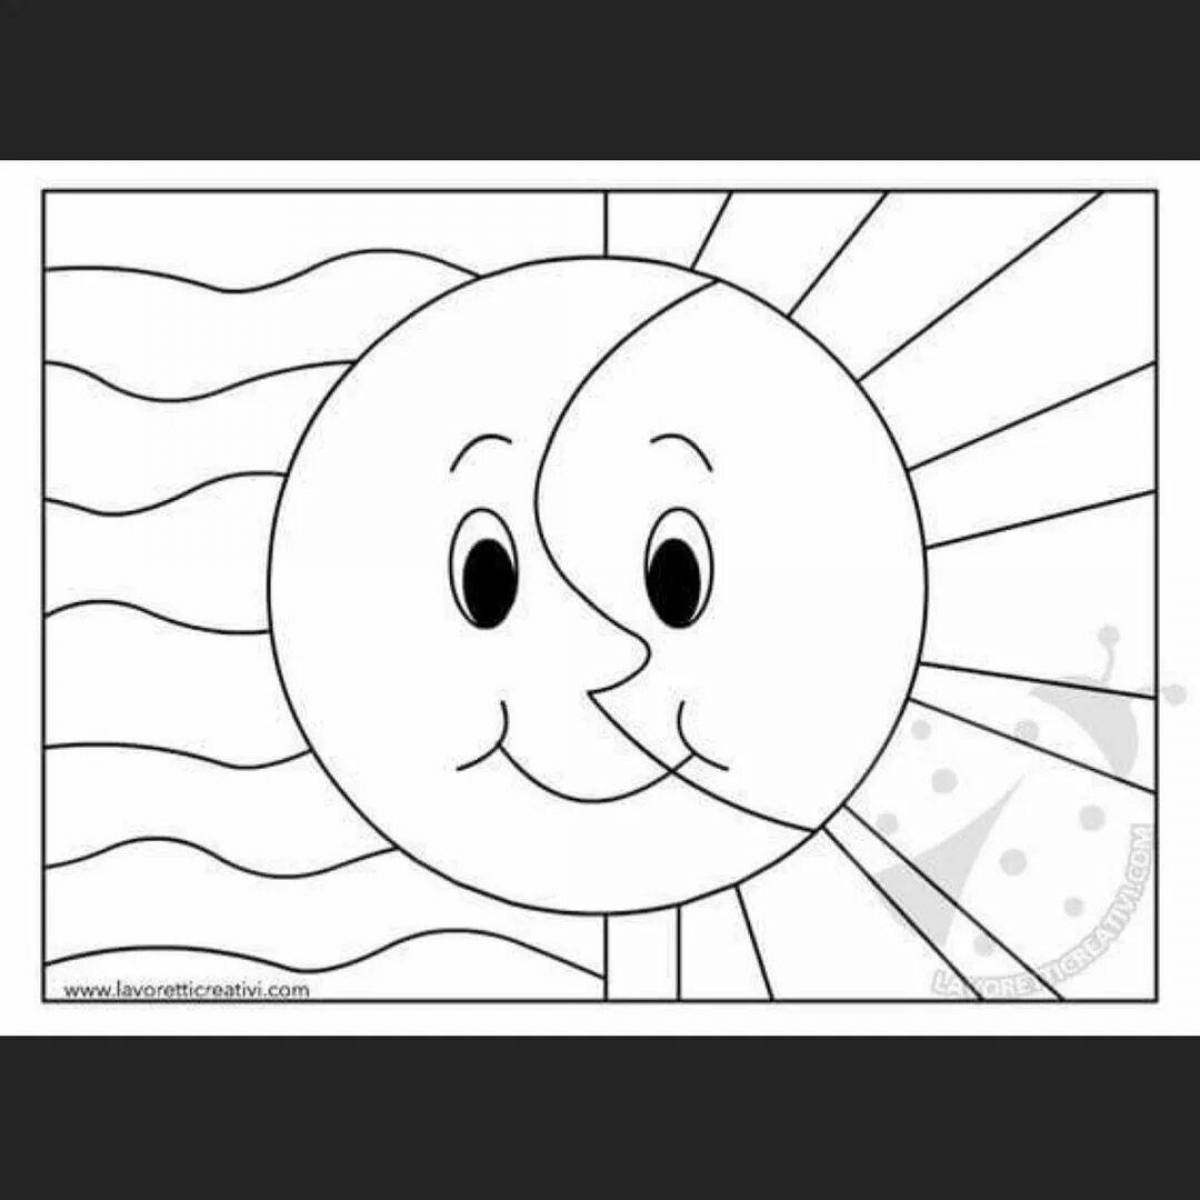 Playful day and night coloring page for kids